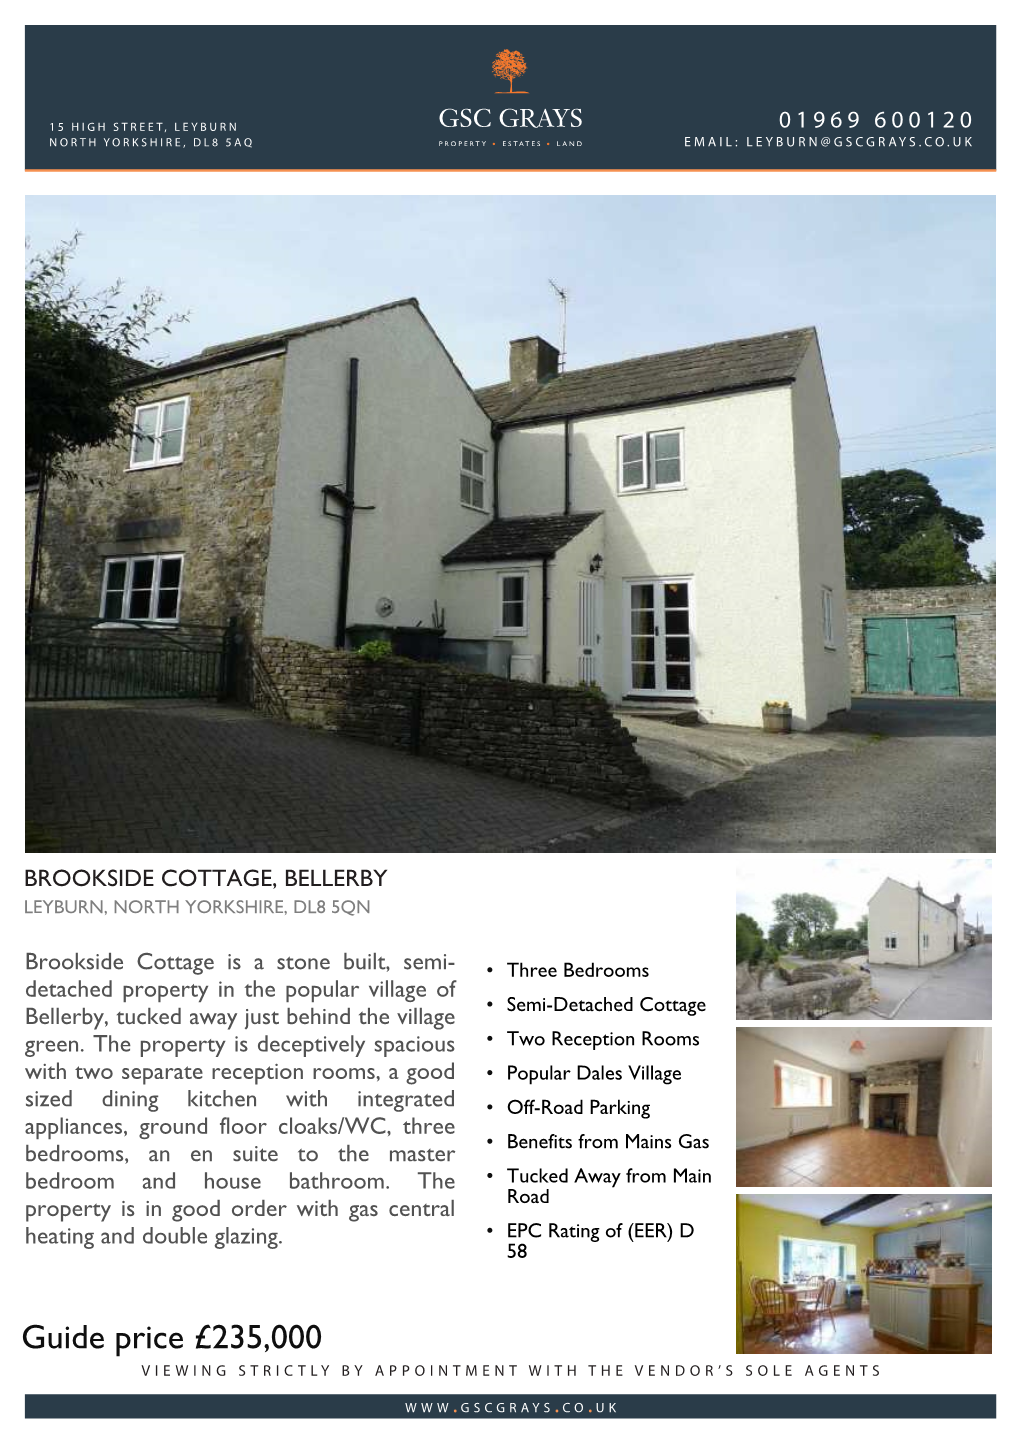 Guide Price £235,000 Viewing Strictly by Appointment with the Vendor’S Sole Agents